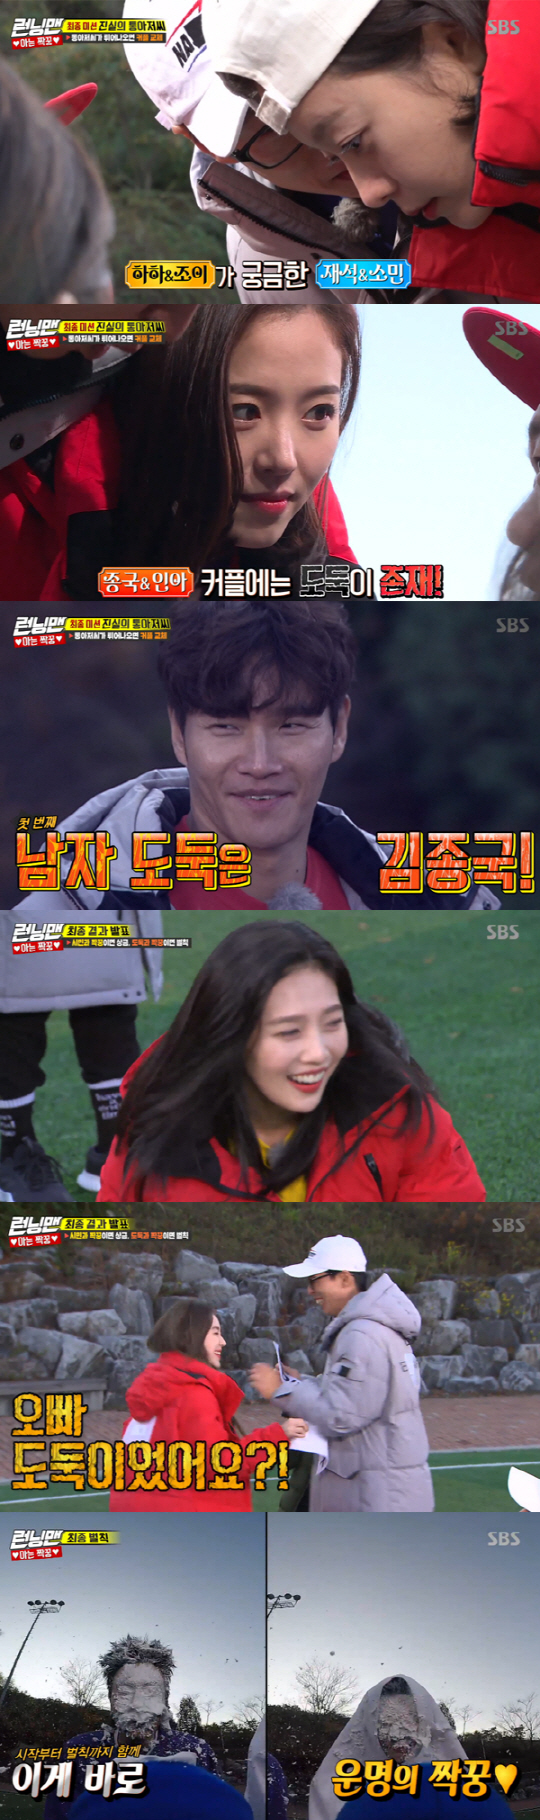 Running Man Lee Kwang-soo and Joy get final penaltyOn SBS Running Man broadcasted on the 25th, Irene - Joy, actor Kang Han-Na, and Seol In-ah appeared in Red Velvet as Knowing Pair Race and played a burglar search race.The team announced that if they were a match with a citizen, they would be punished for the prize money and the match with the thief.After each game, the winning couple tells the identity of their partner, but if the last couple has a thief, the fact is revealed to the whole.Lee Kwang-soo and Joy won the first mission Barefoot Tango while winning the chance to use the mission through the dictionary game.Lee Kwang-soo and Joy decided to keep the couple together after confirming each others identity in the room of truth.The final last, on the other hand, was a Ji Suk-jin and Song Ji-hyo couple, when the crew informed there are thieves among Mr. Ji Suk-jin and Song Ji-hyo.Song Ji-hyo was a thief, but drove Ji Suk-jin to the thief.The second mission is to eat avatar jjajangmyeon, and the time it takes for each pair to eat is the fastest couple to win.As a result, Haha and Kang Han-Na took first place.Having identified each other in the room of truth, Haha and Kang Han-Na made a couple change with Lee Kwang-soo Joy.On the other hand, the last was again a Ji Suk-jin Song Ji-hyo couple.The final mission is Uncle Tong of Truth, and when Uncle Tong pops out, the couple will be replaced.Kang Han-Na and couple Lee Kwang-soo confirmed Kim Jong-kook Seol In-ah couple with a quiz conducted with four knives.Lee Kwang-soo attempted to replace the Ji Suk-jin Joy couple with the words there are couples; the result failed.In addition, the successful quiz, Yoo Jae-Suk, a couple of former Somin couples, confirmed the identity of Kim Jong-kook and Joy couple, and found out that Kim Jong-kook was a thief.Lee Kwang-soo tried to get out of the couple with Kang Han-Na, who thought he was a thief; at that moment, Kang Han-Na surprised Haha all of his choices first.Haha and Kang Han-Na confirmed that each other was citizens, and then they replaced the couple deliberately.Eventually Lee Kwang-soo became the final couple with the thief Song Ji-hyo.Joy, who also became the final couple with the thief Kim Jong-kook, was frustrated by Kim Jong-kooks burglary; also Seol In-ah and Yoo Jae-Suk were thieves.Joy, Lee Kwang-soo, Ji Suk-jin and Irene, who were couples with them, won the penalty Zhong You.But there are only two Cream penalty players.Joy picked up a penalty for Zhong You through Uncle Tong Game, and Joy pointed to Lee Kwang-soo, who received a cream penalty together.